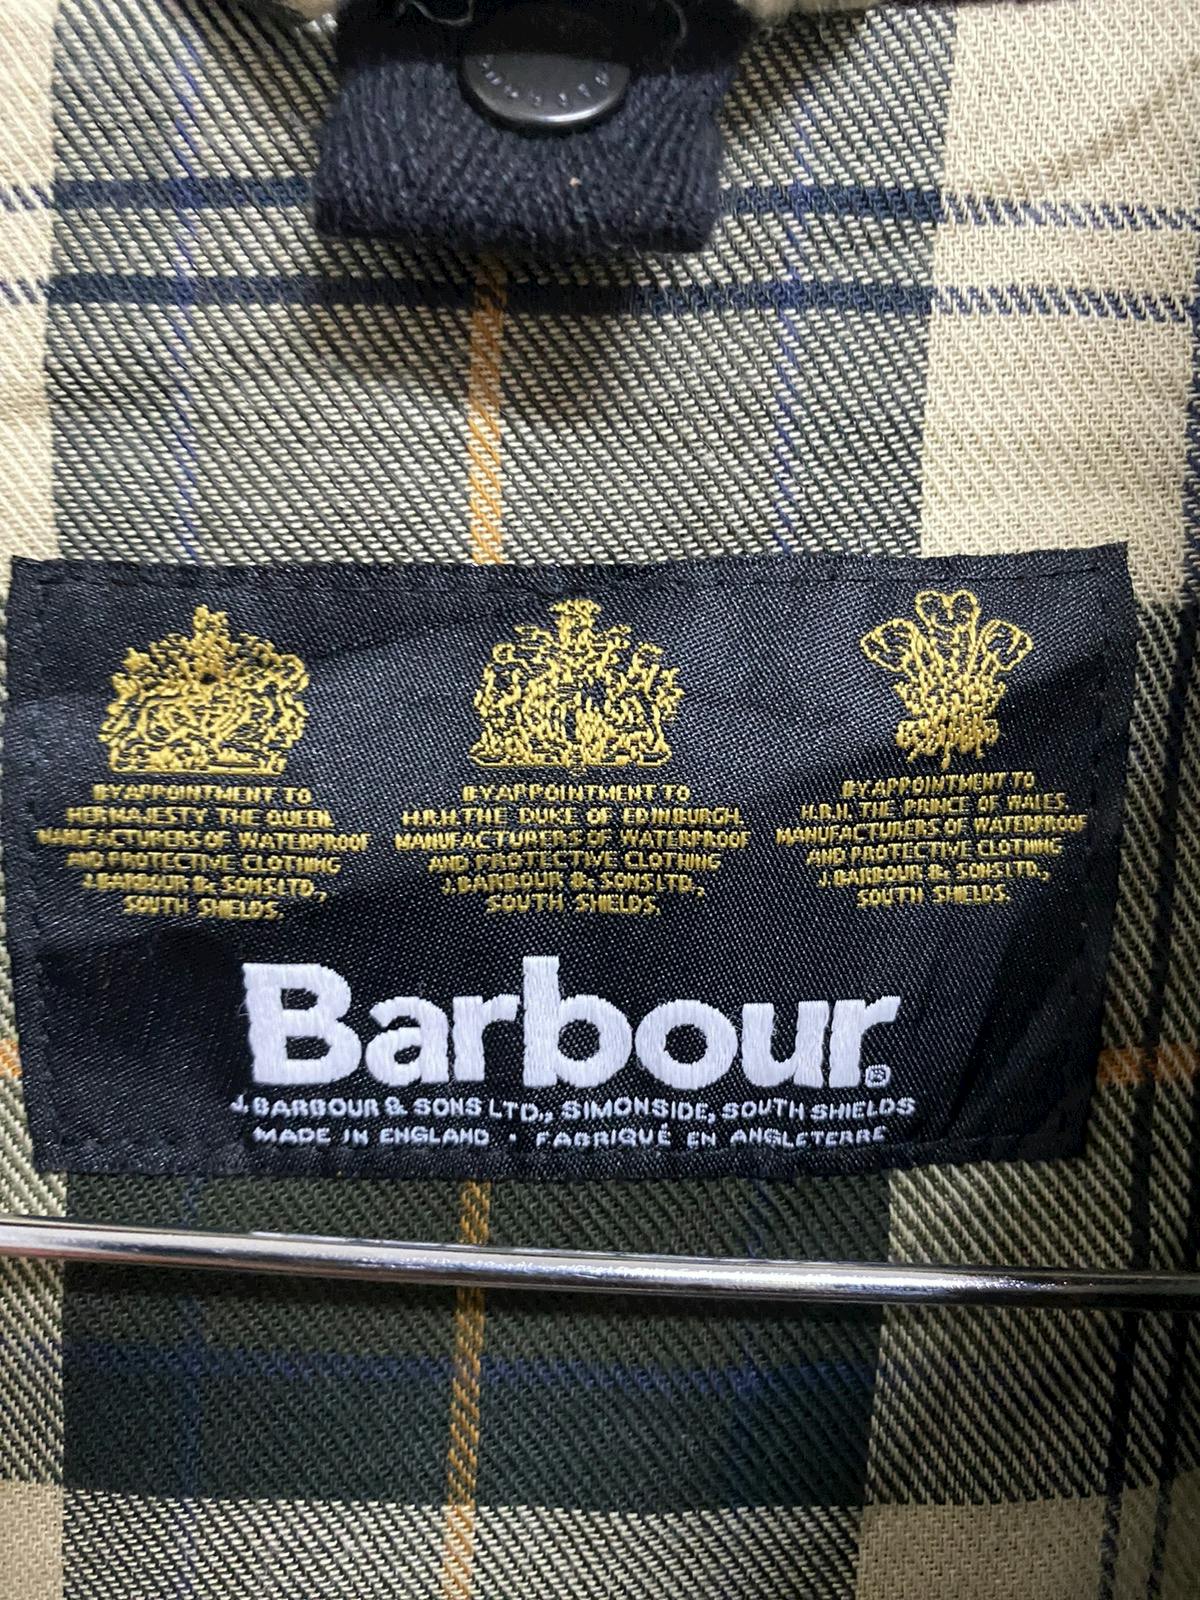 Barbour Classic Bedale AW19 Wax Jacket Made in England - 11